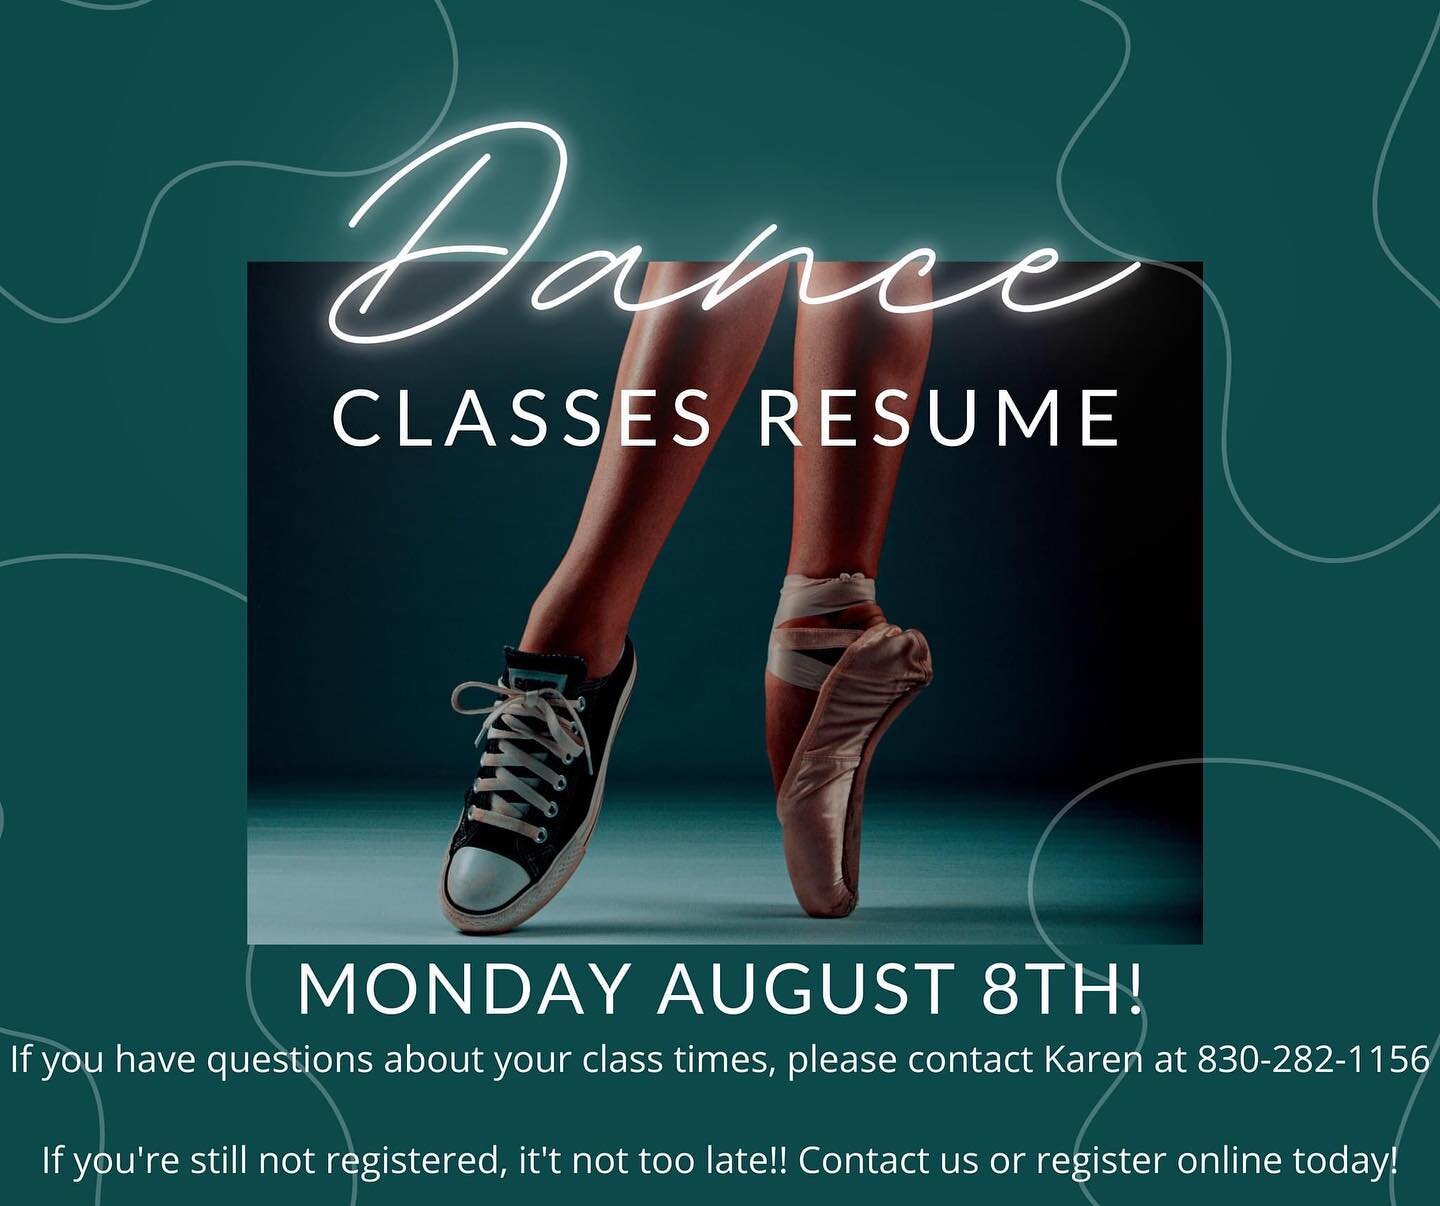 Get those dancing shoes on!! We are so excited to be back in studio starting this coming MONDAY!!! If you have any questions about your child's registration, class times, or need to make any changes, please contact Karen at 830-282-1156. 
Still need 